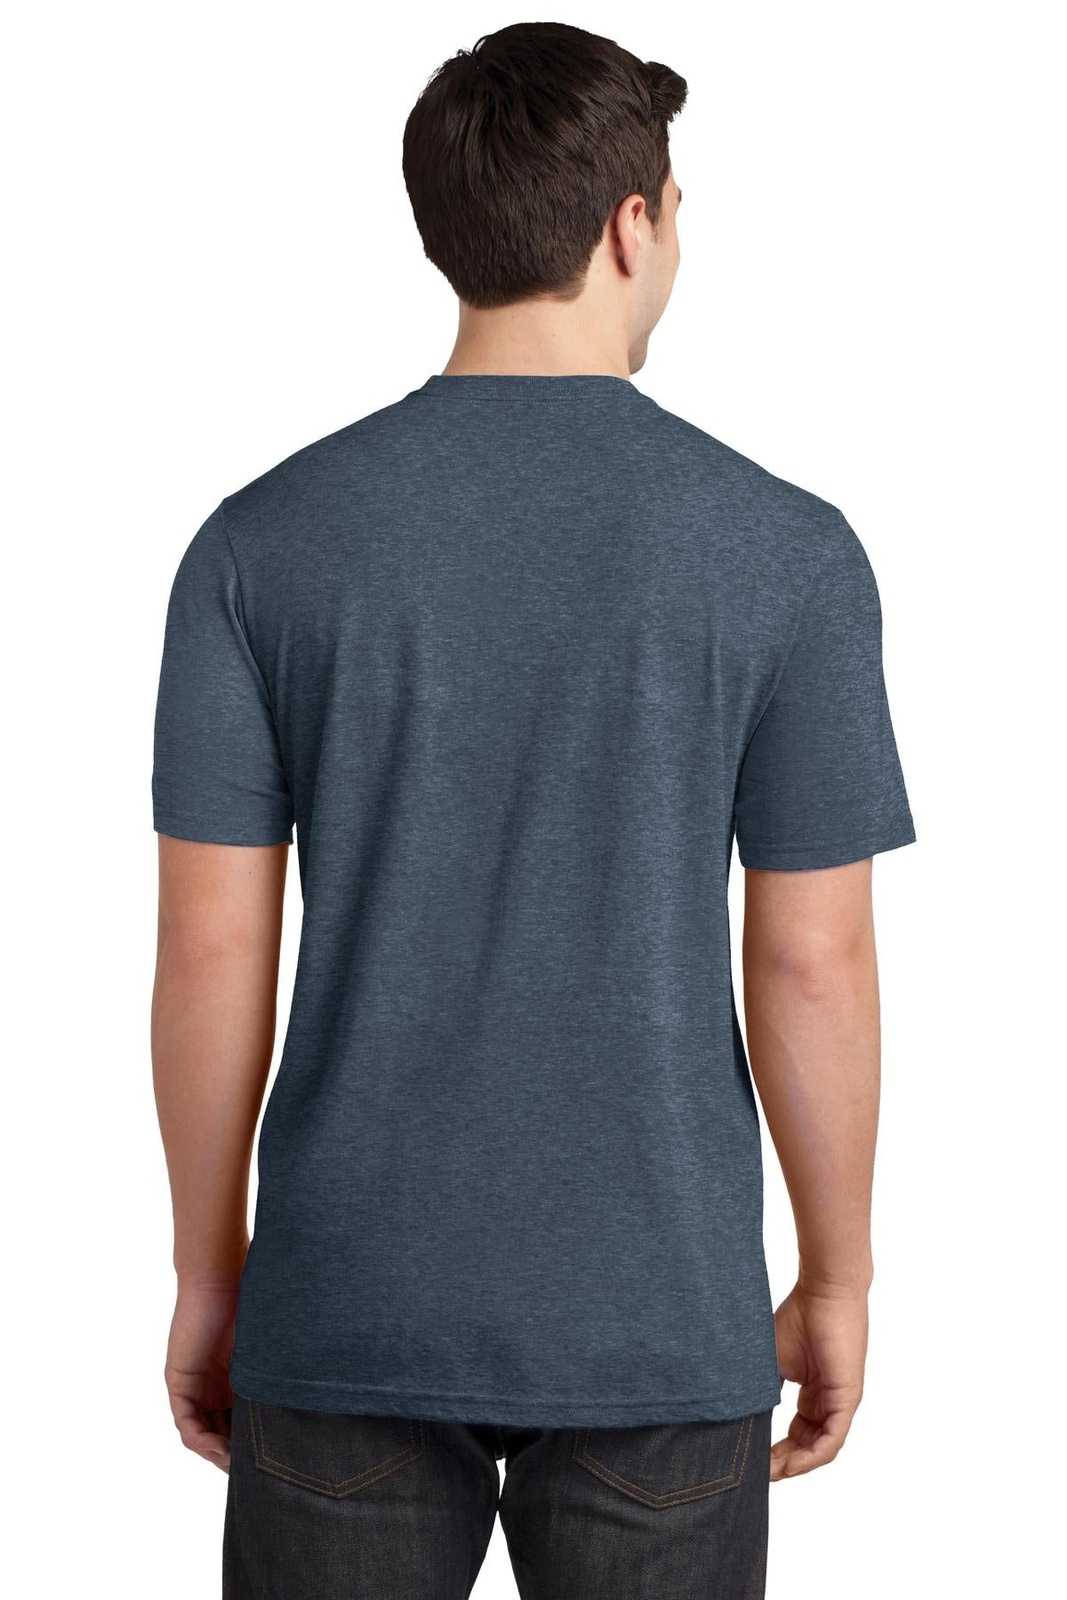 District DT6000P Very Important Tee with Pocket - Heathered Navy - HIT a Double - 2